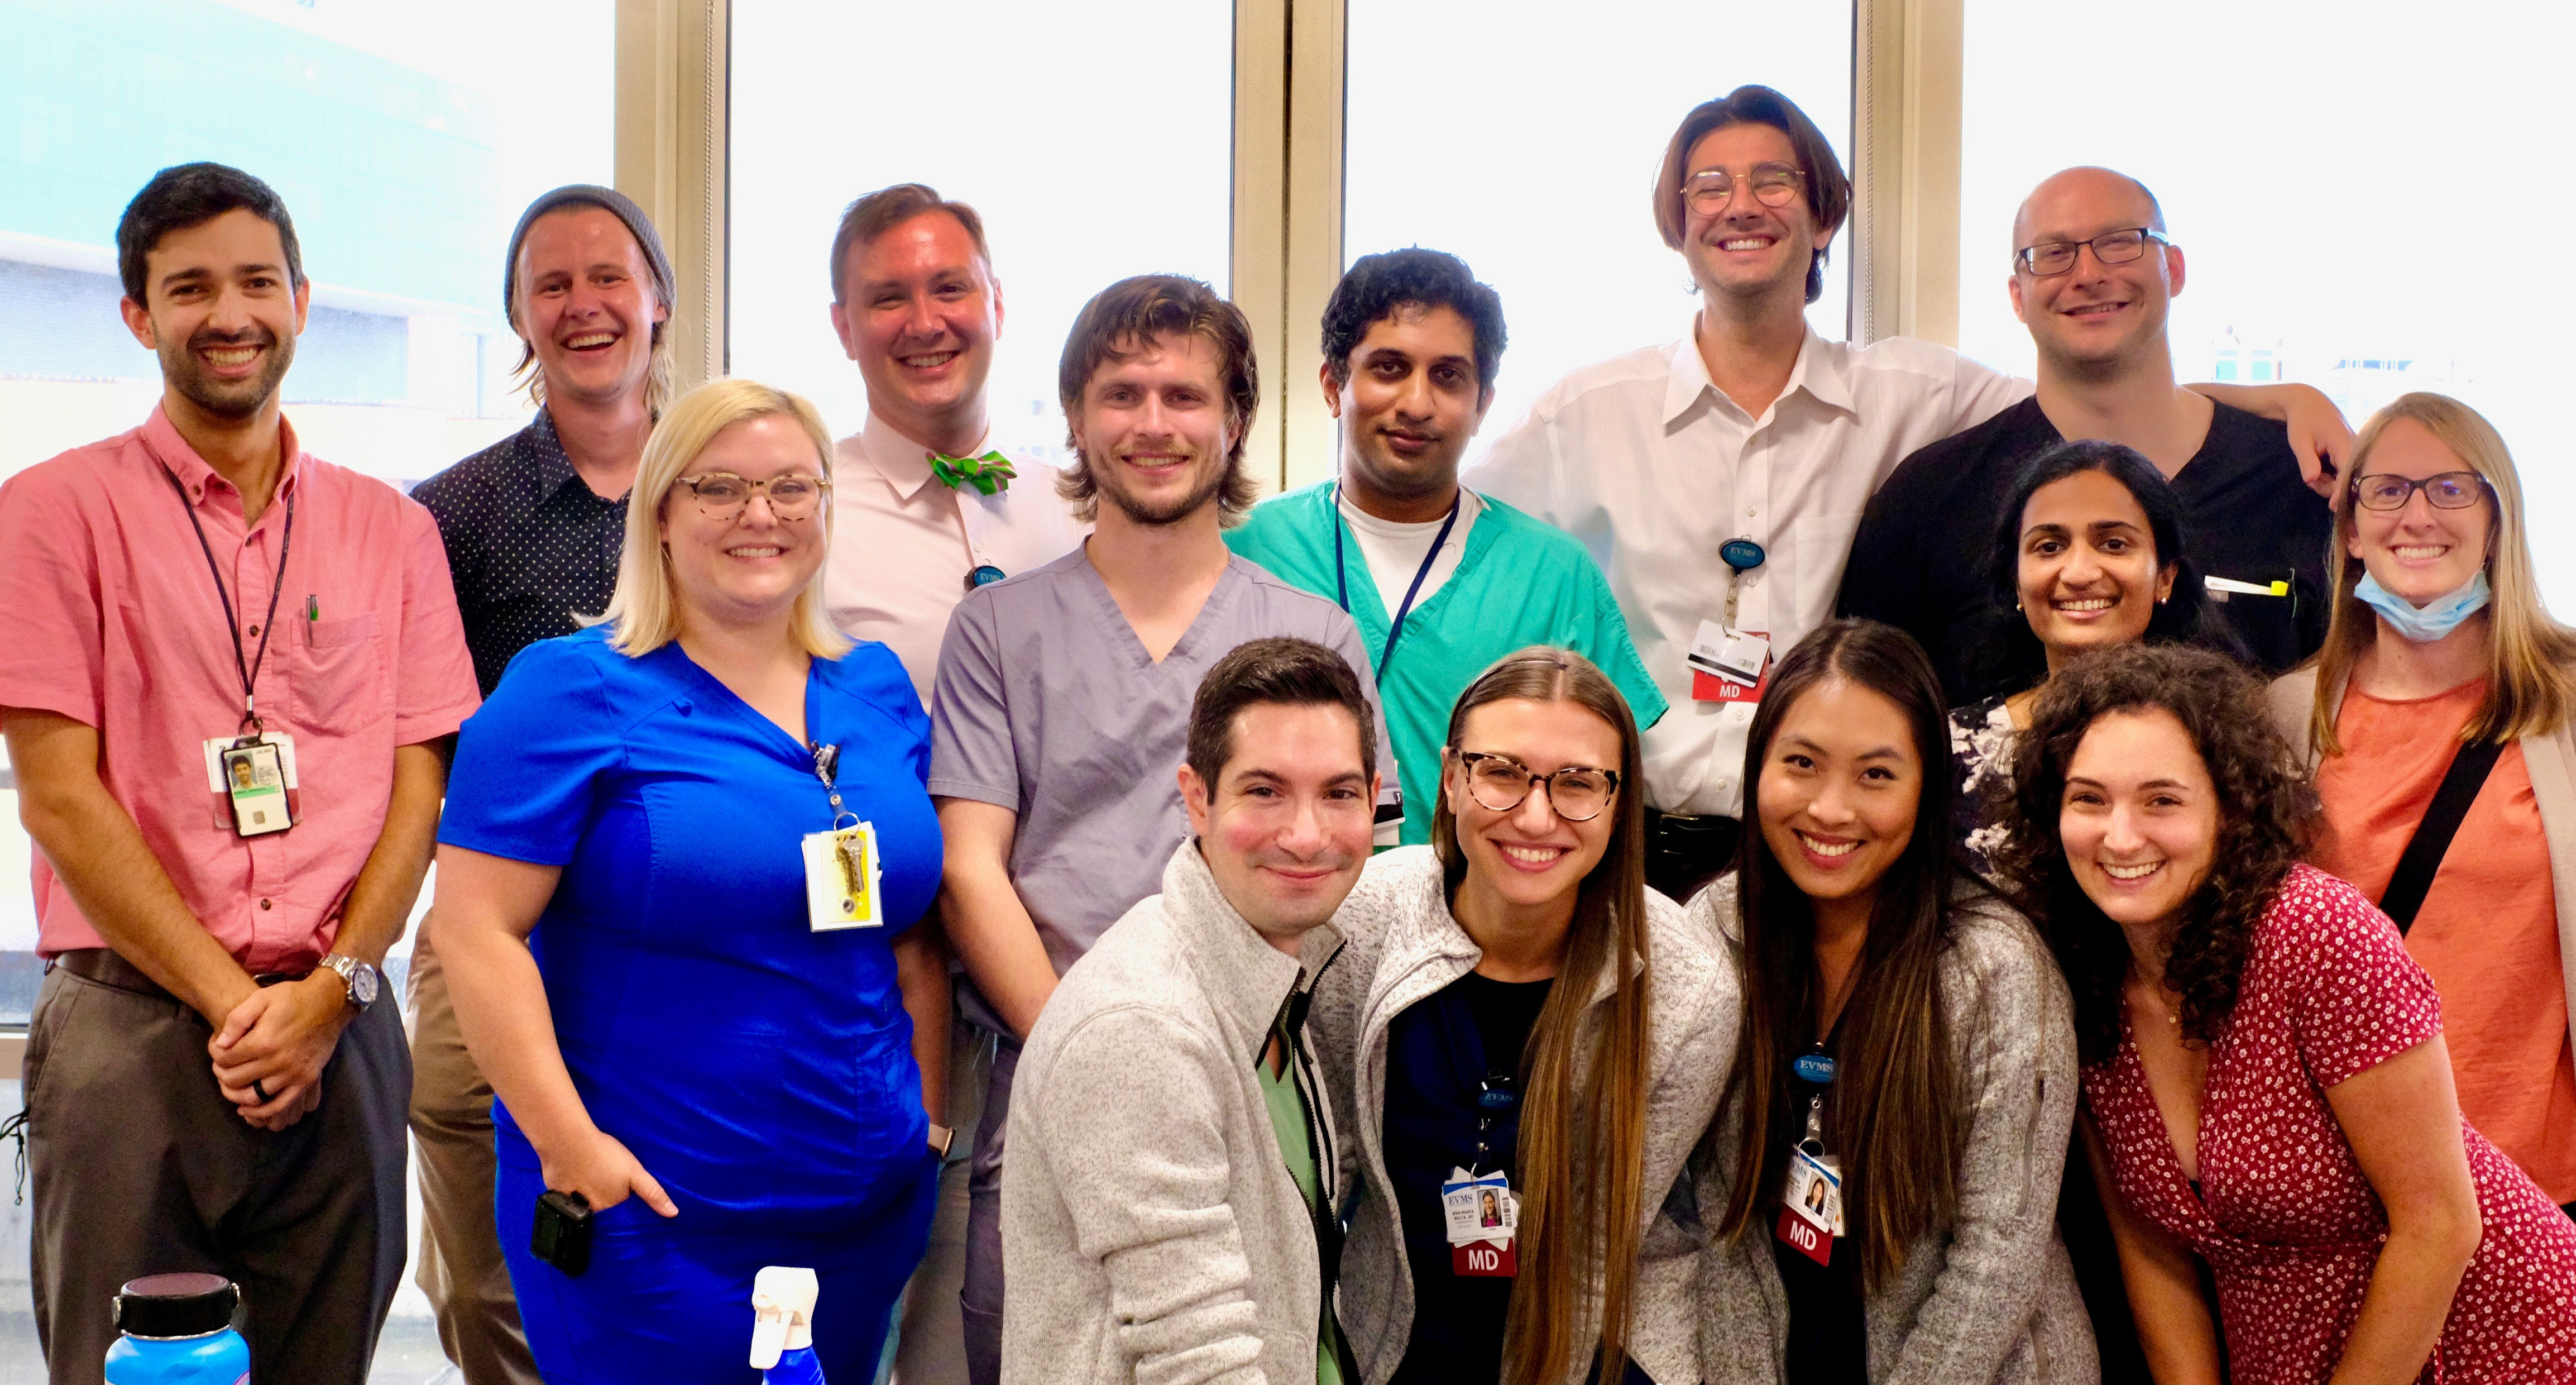 More than a dozen male and female psychiatry residents gather smiling in a group